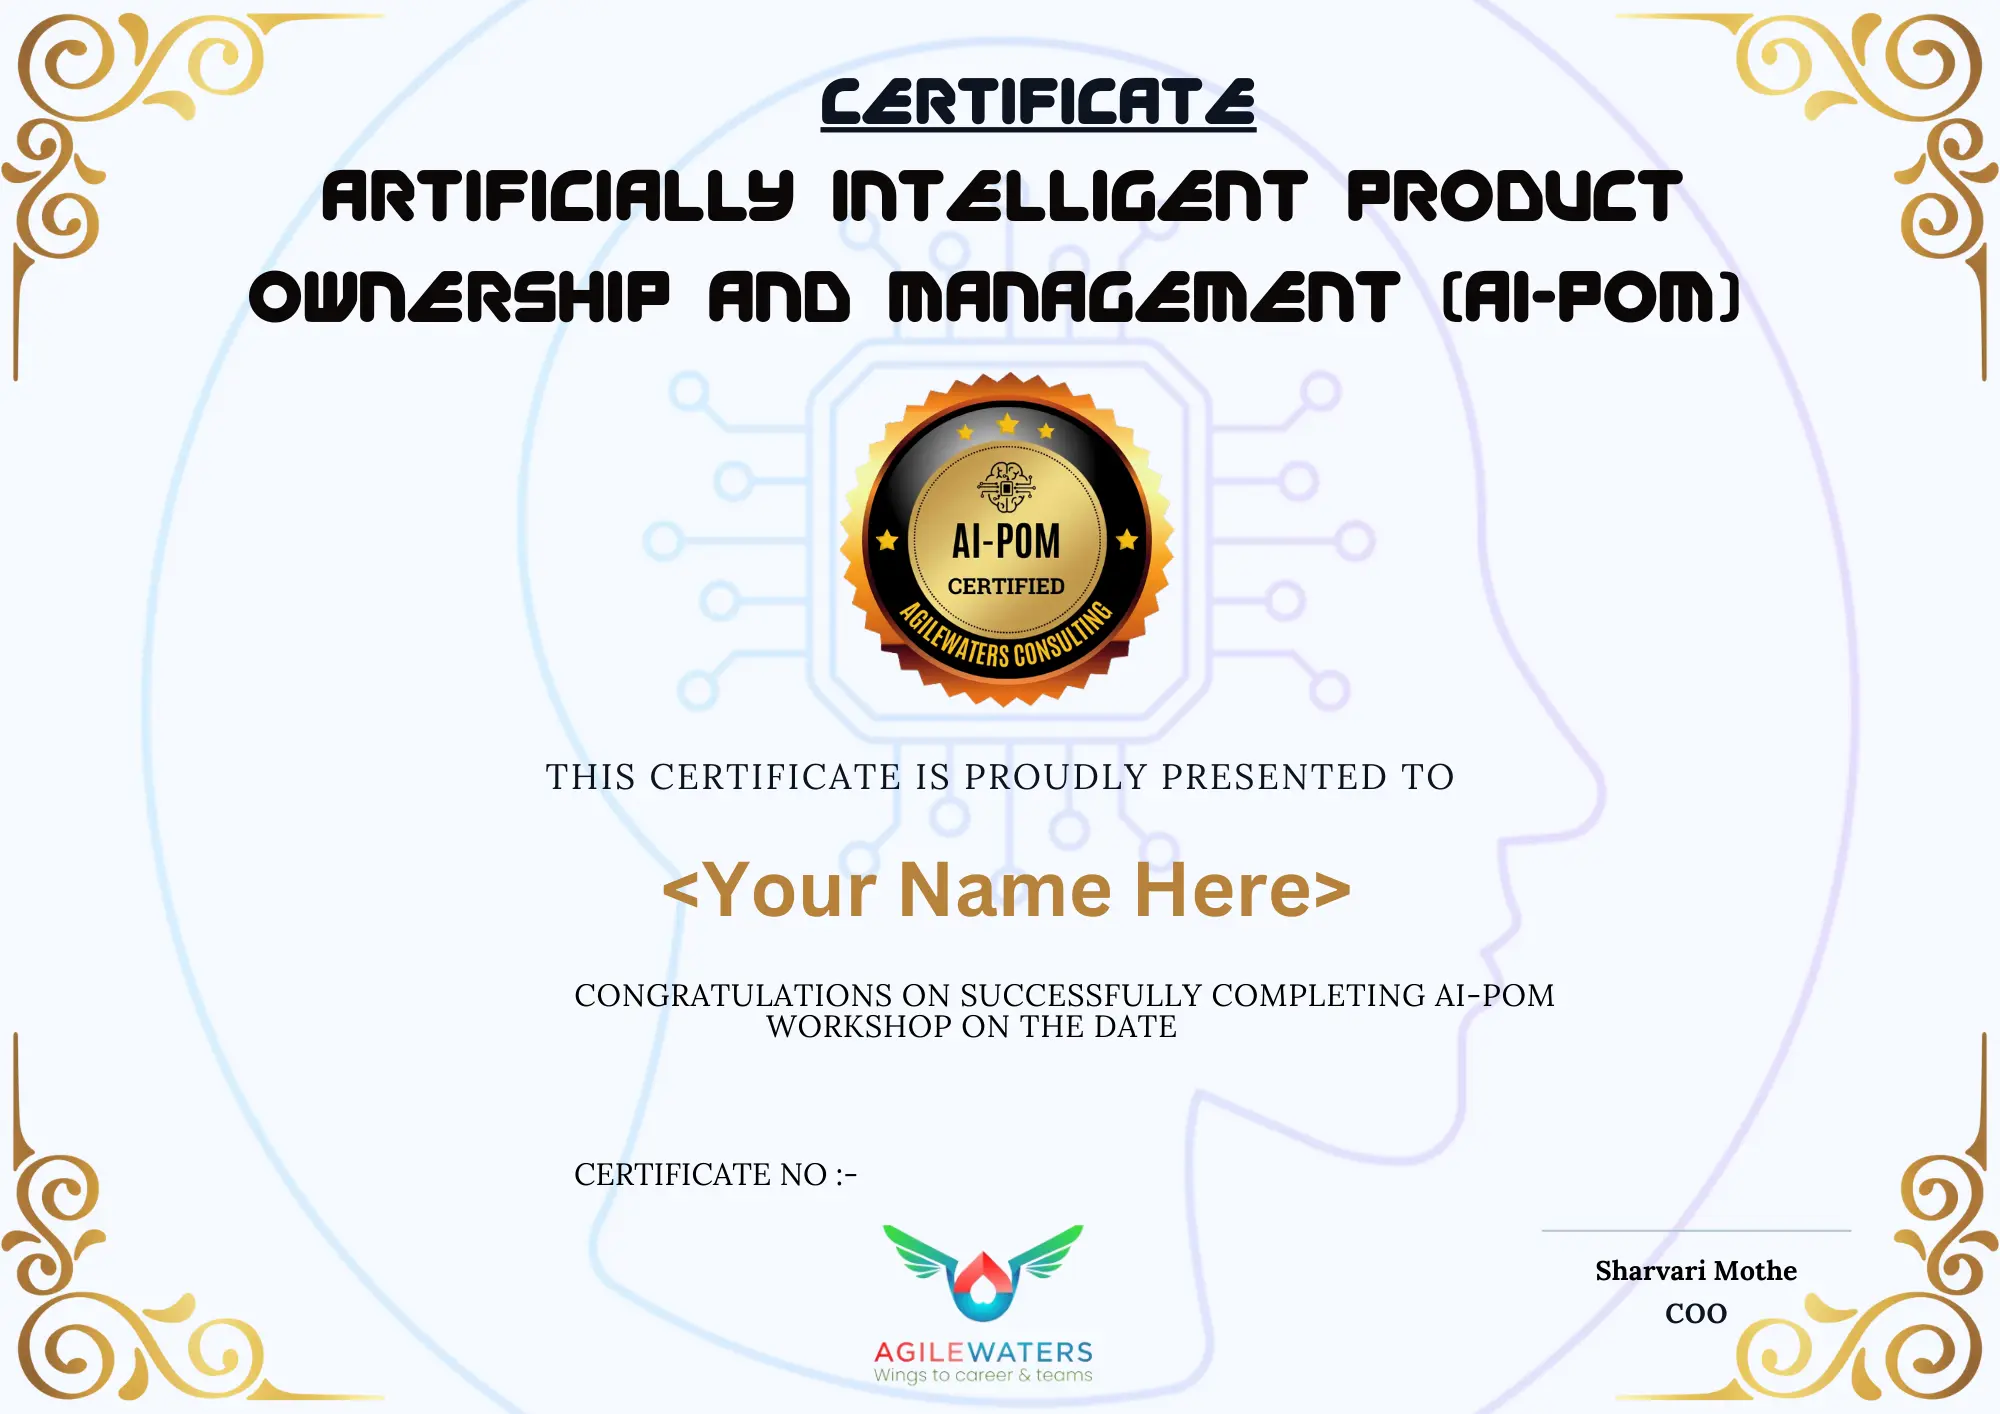 AIPOM Certificate